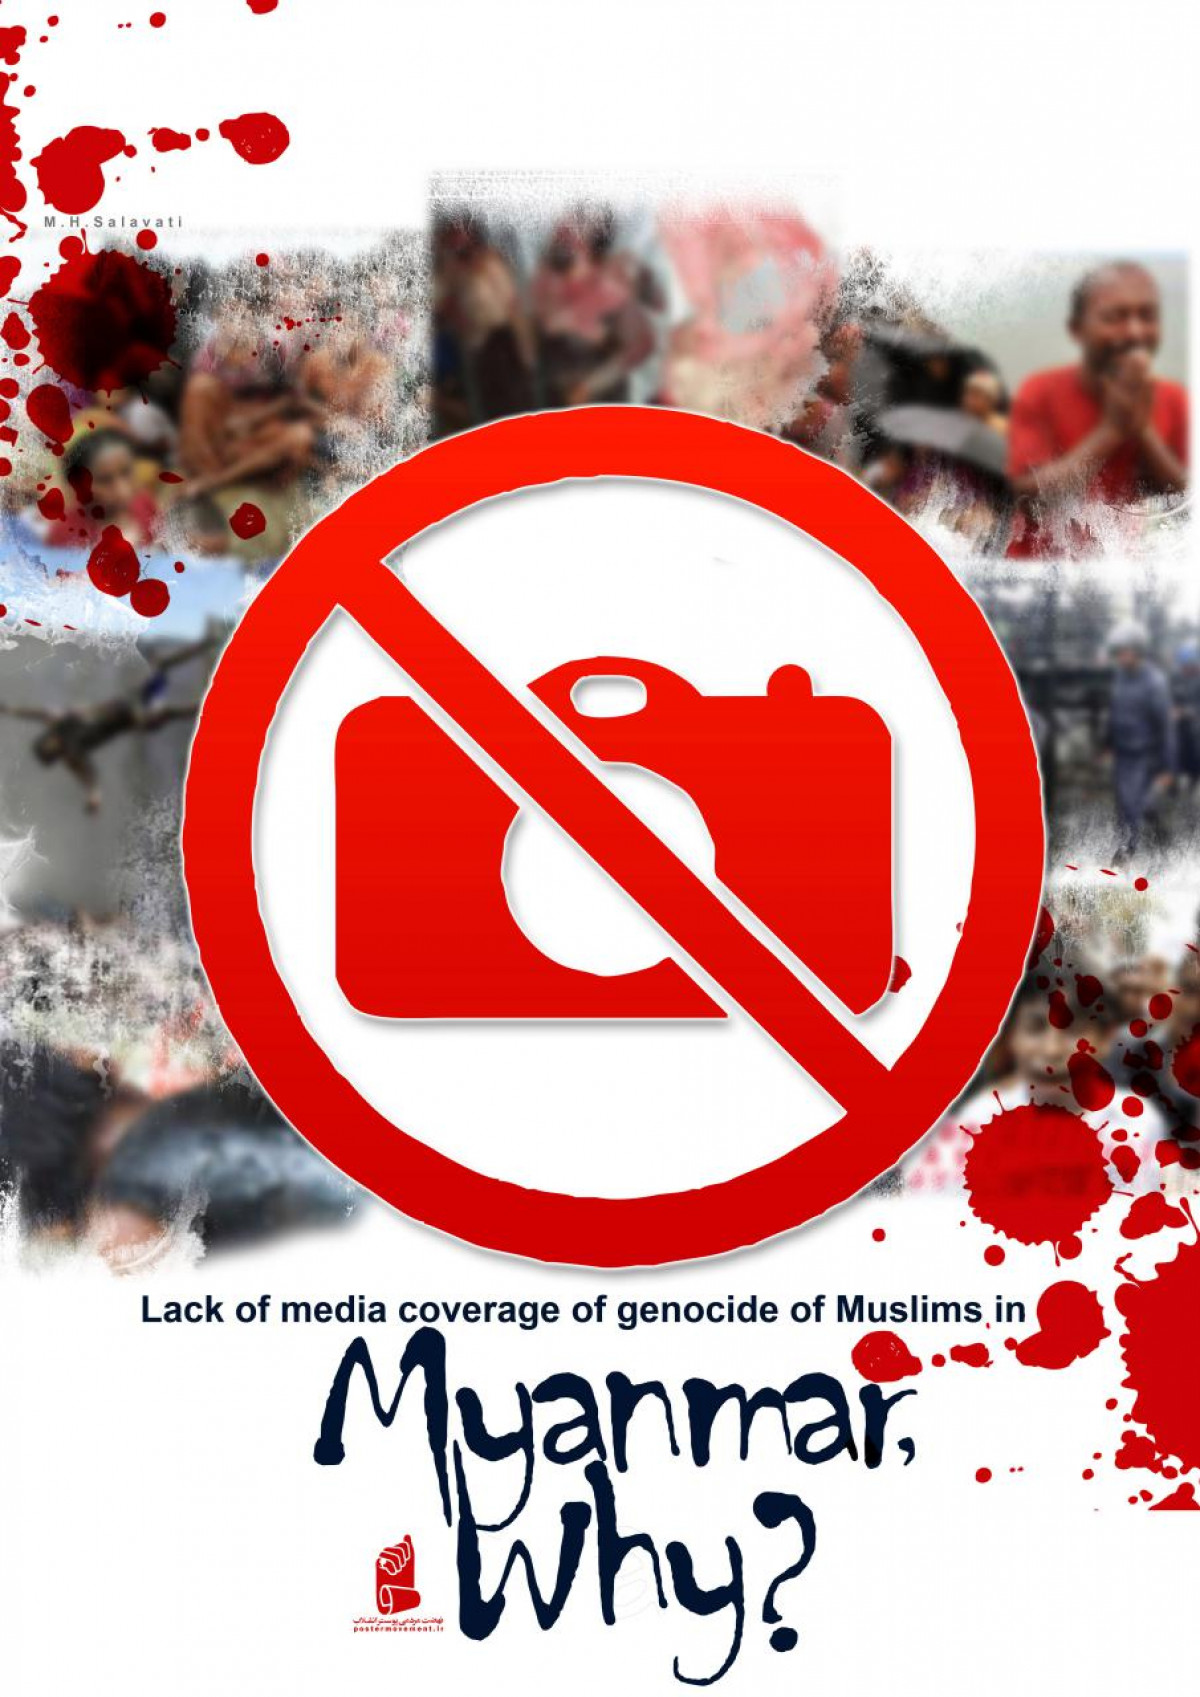 Collection of posters: Lack of media coverage of genocide of Muslims in Myanmar, Why?